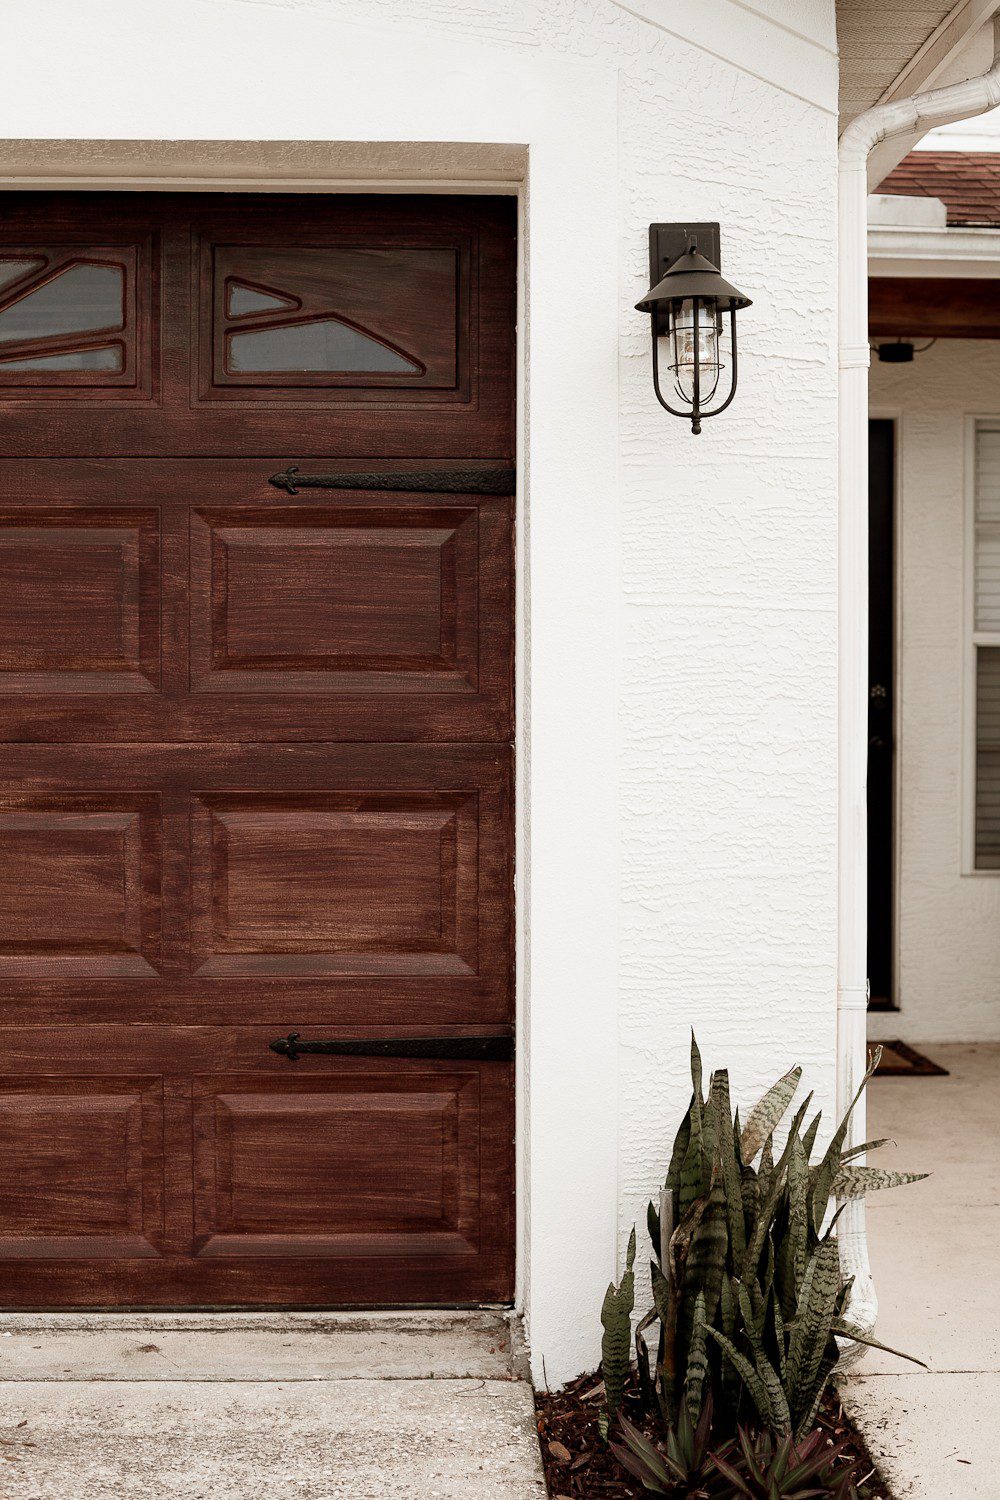 Transform your garage door to a gorgeous faux wood door with this easy gel stain DIY garage door makeover by popular diy blogger Tabitha Blue of Fresh Mommy Blog: image of white house with a faux wood garage door.